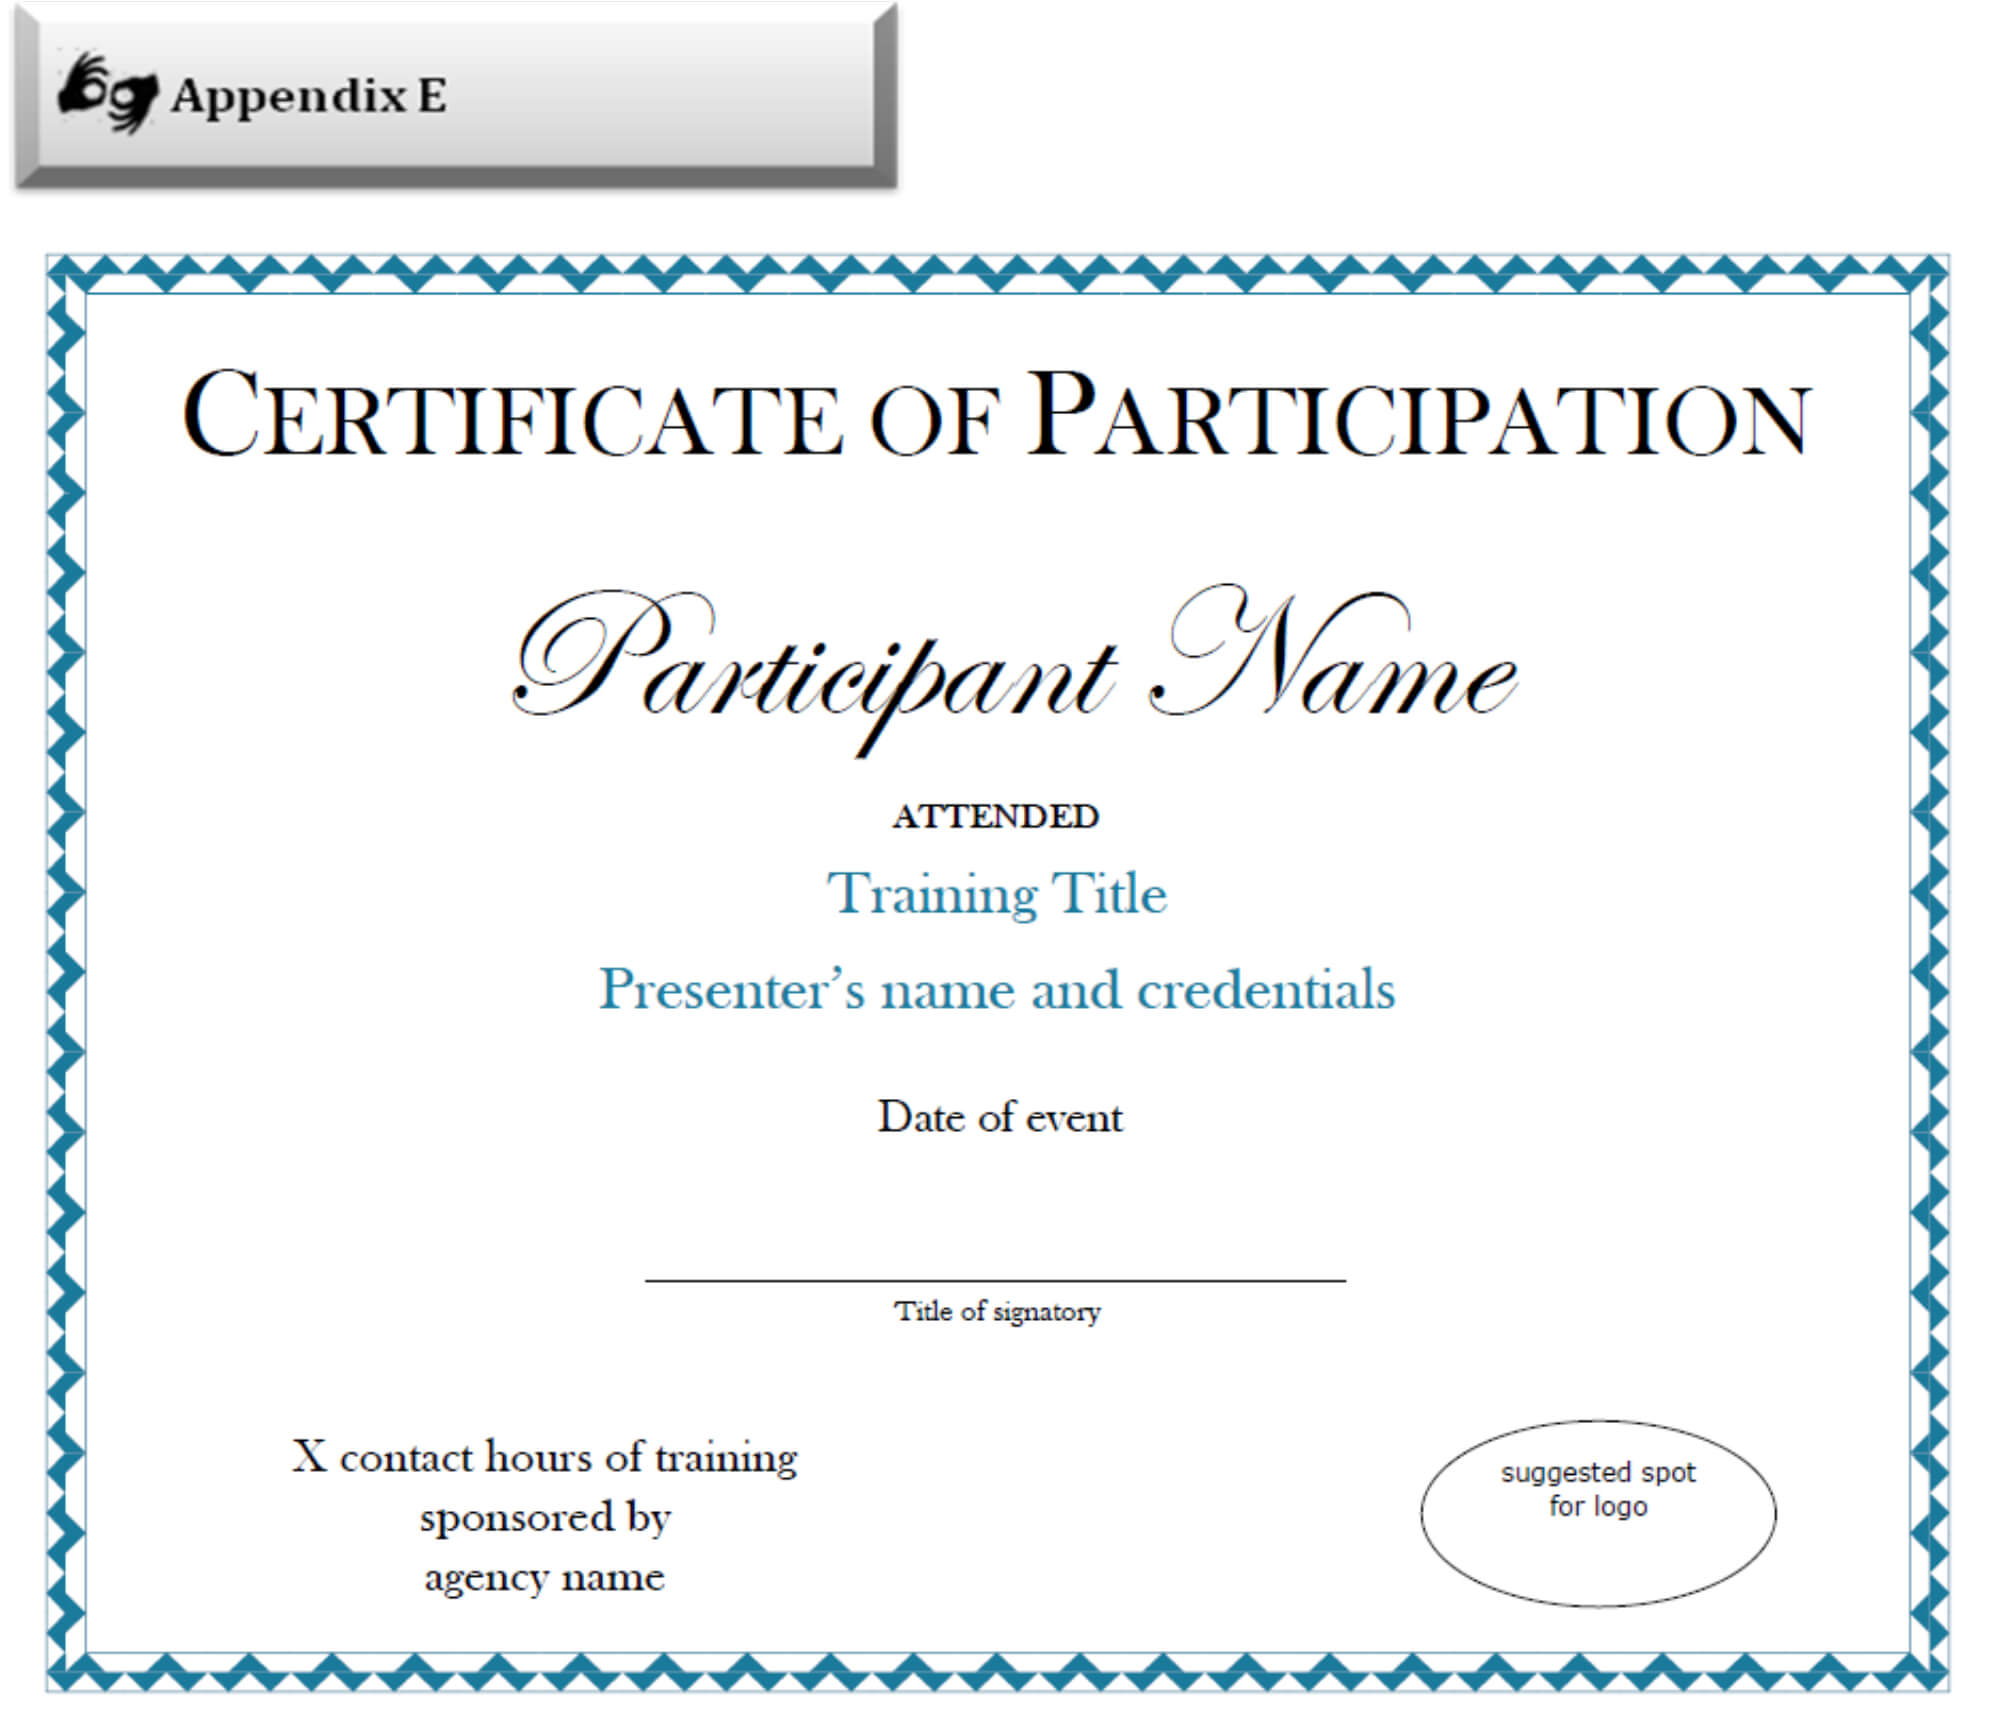 Certificate Of Participation Sample Free Download Pertaining To Participation Certificate Templates Free Download